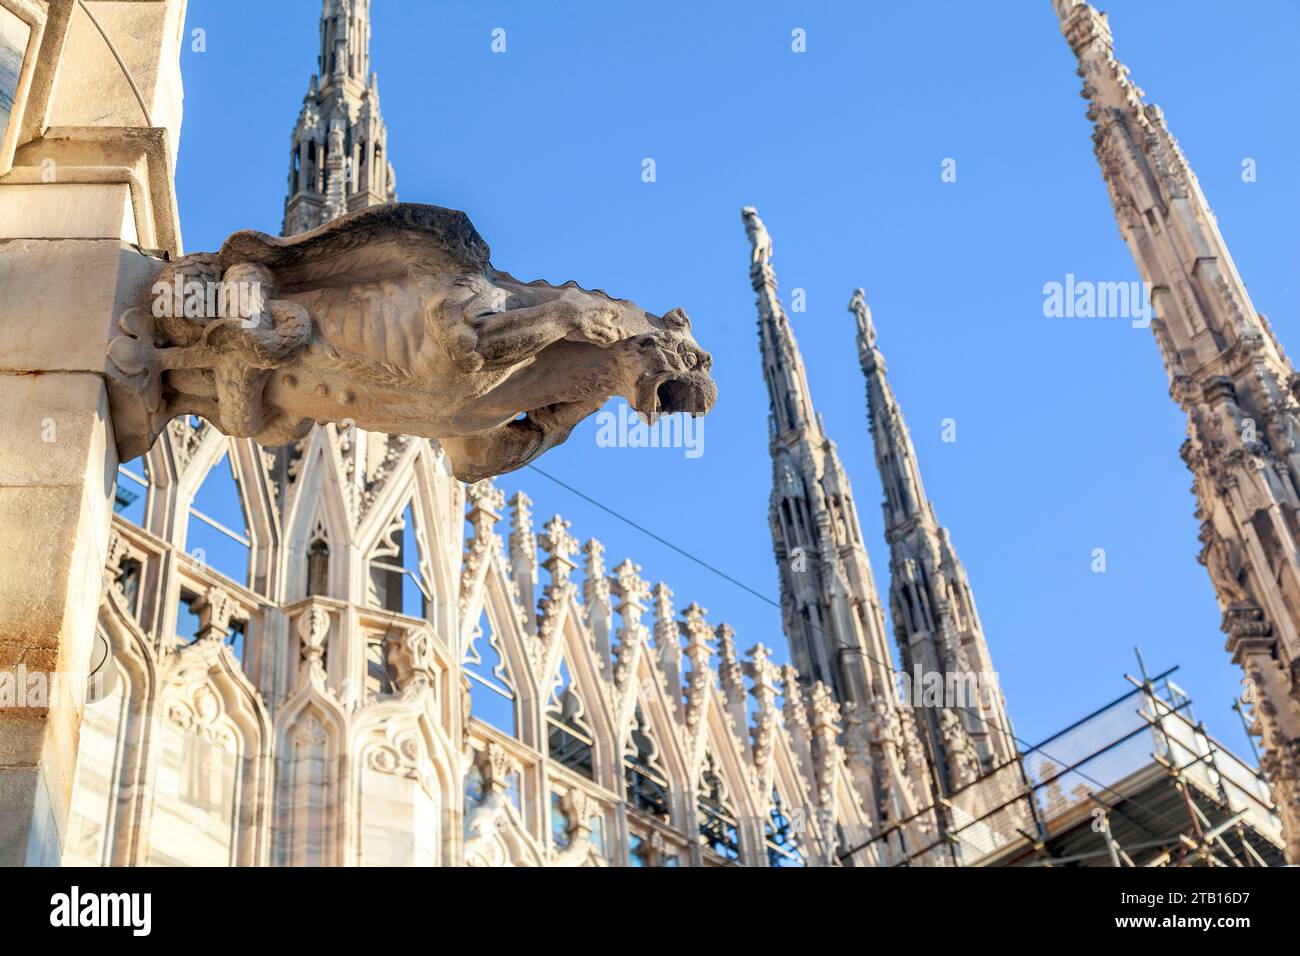 Detail from Milan Duomo rooftop, elaborate gargoyle sculpture as seen from below with the Duomo towers at the background, during afternoon light. Stock Photo